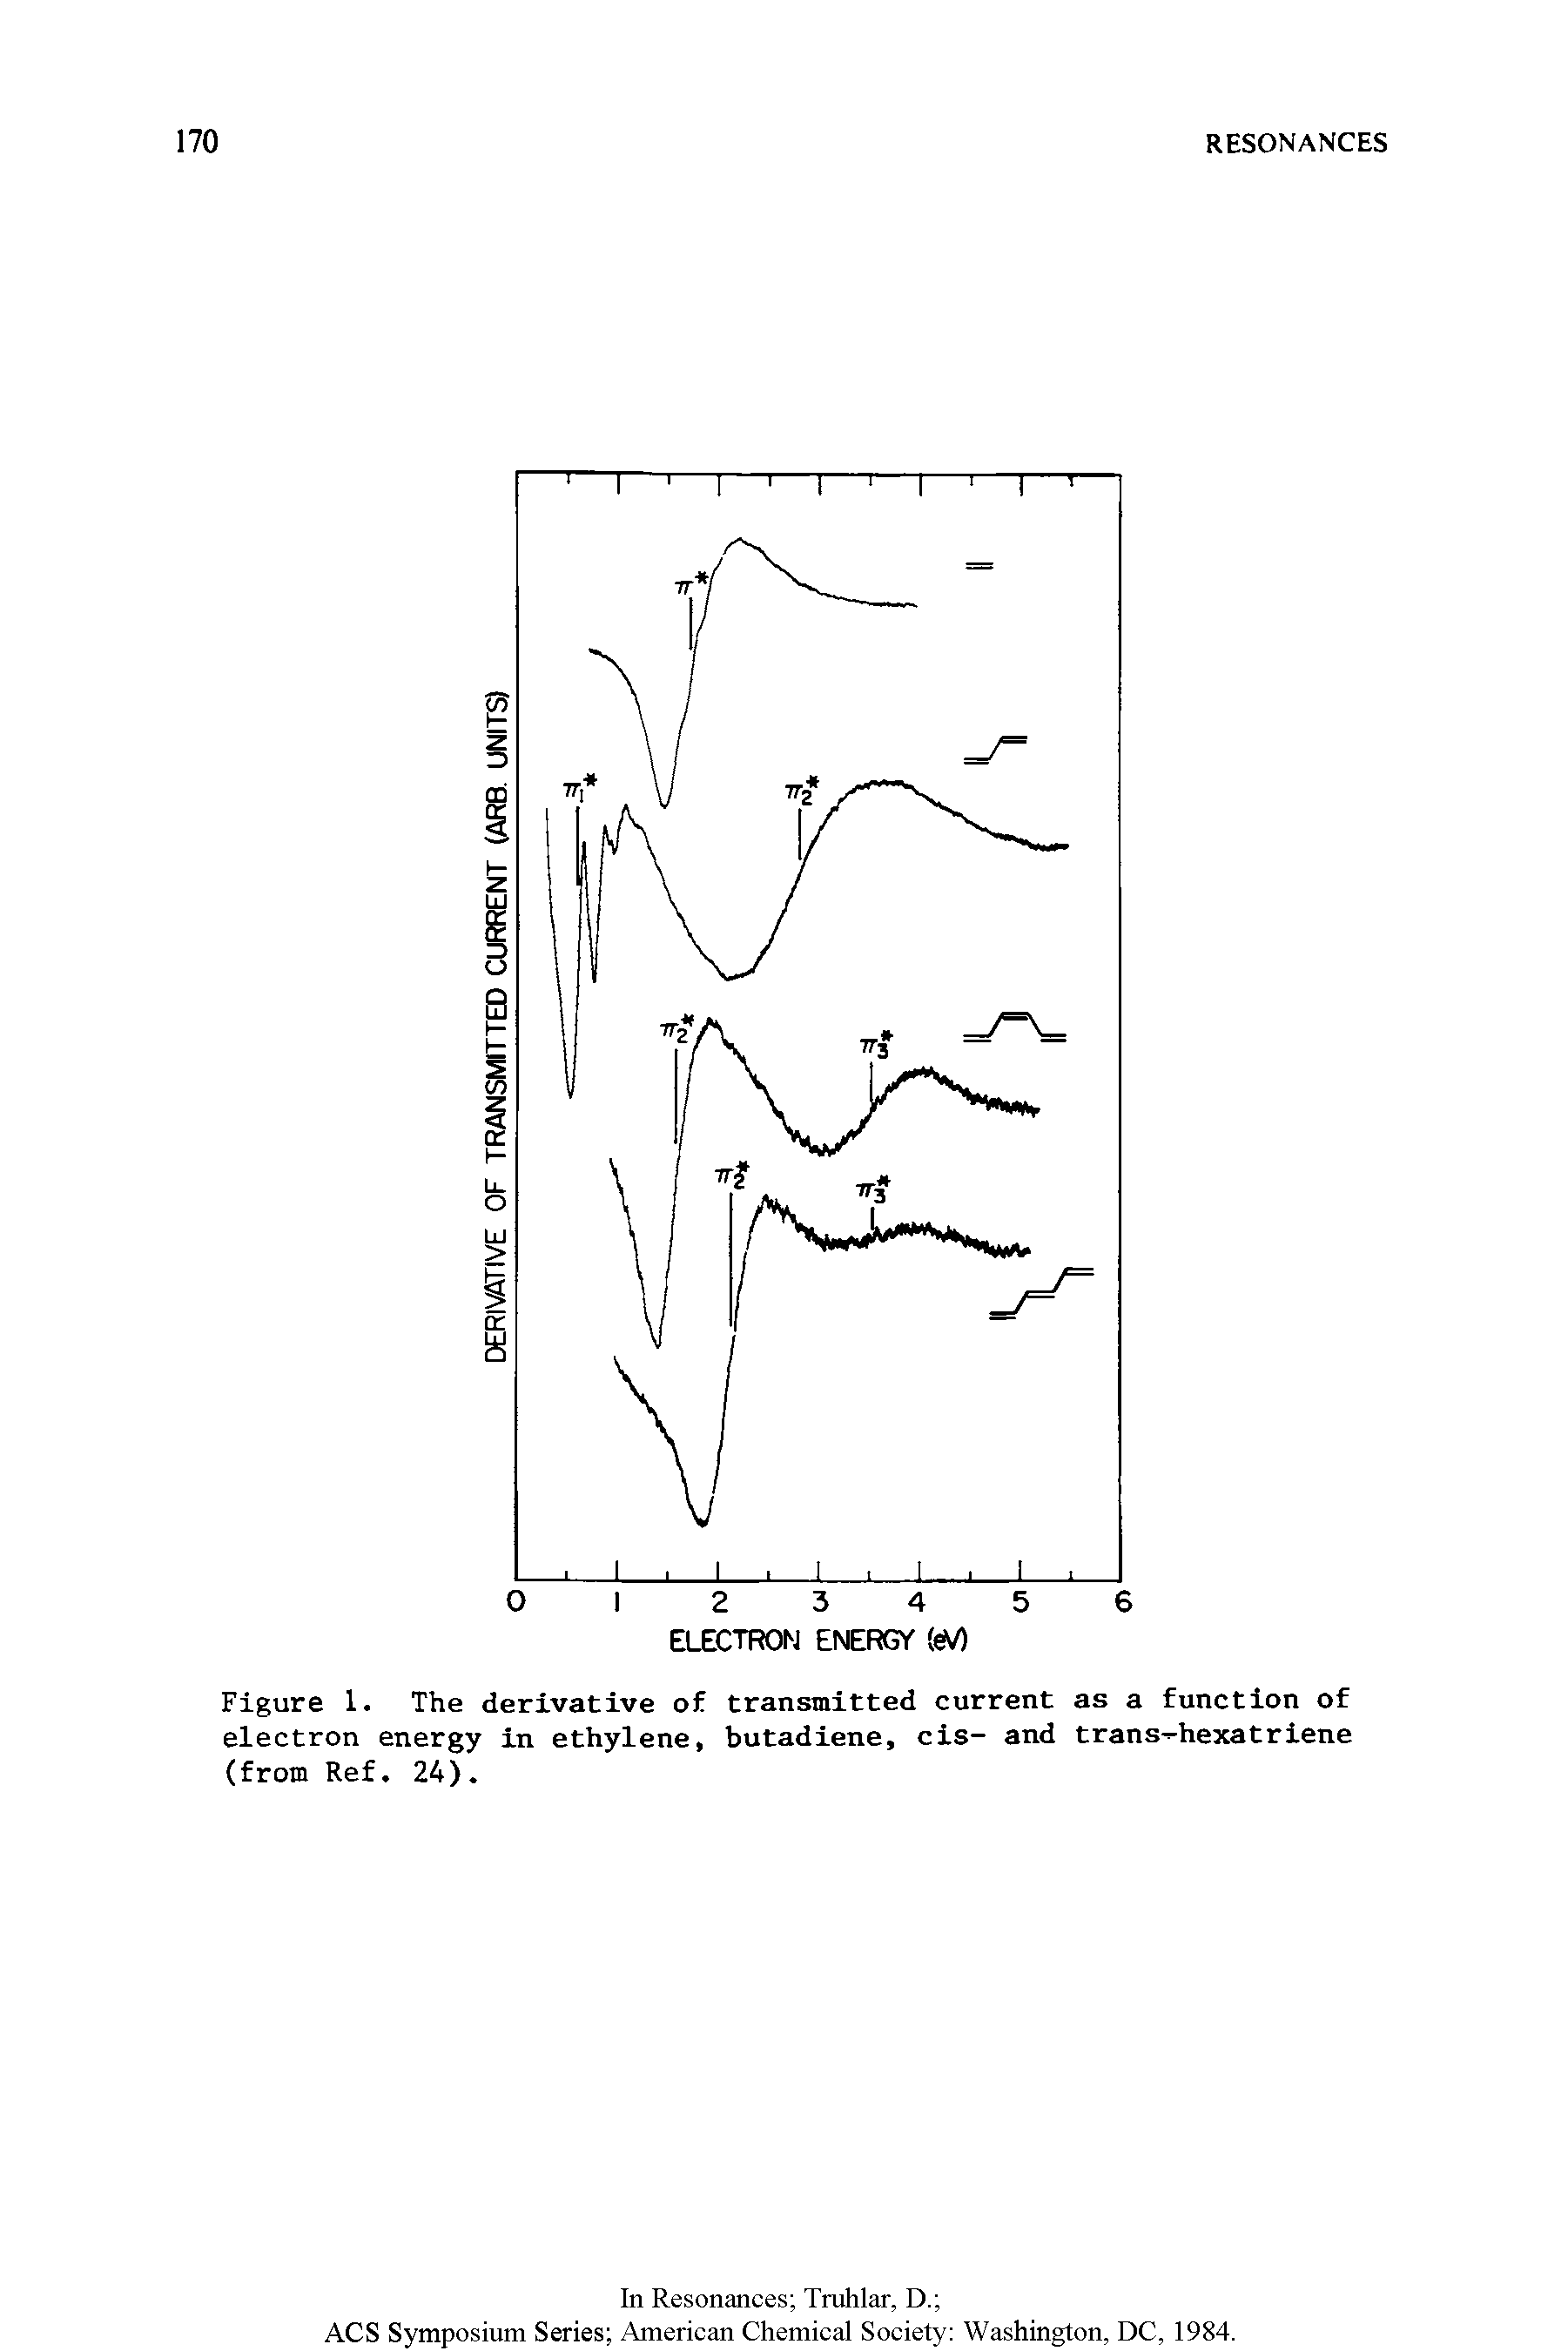 Figure 1. The derivative of transmitted current as a function of electron energy in ethylene, butadiene, els- and trans-hexatriene (from Ref. 24).